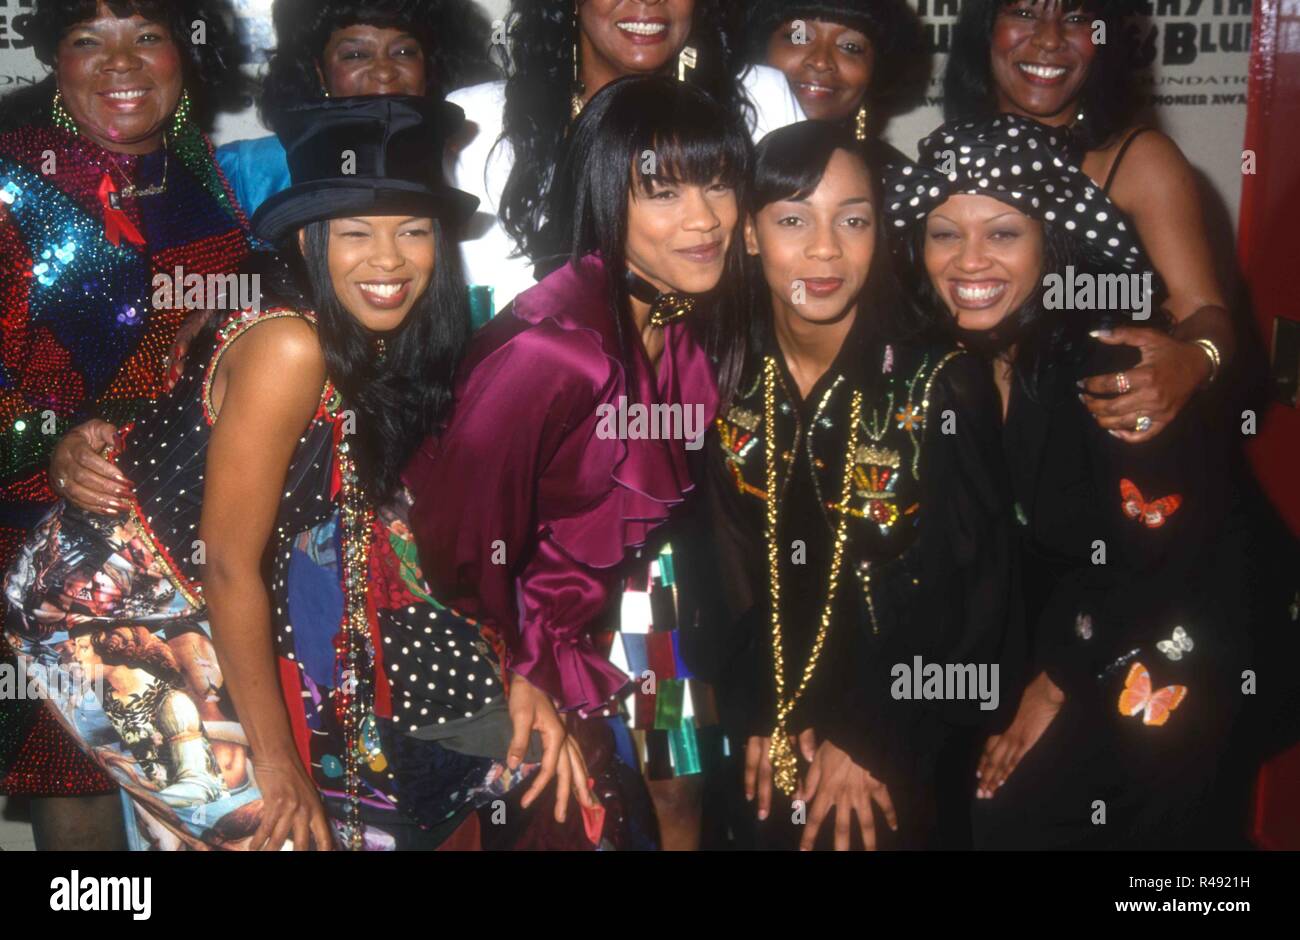 LOS ANGELES, CA - FEBRUARY 25: Singers Dawn Robinson, Cindy Herron Terry Ellis and Maxine Jones of music group En Vogue attend The Rhythm & Blues Foundation's Fourth Annual Pioneer Awards on February 25, 1993 at the Palace Theatre in Los Angeles, California. Photo by Barry King/Alamy Stock Photo Stock Photo